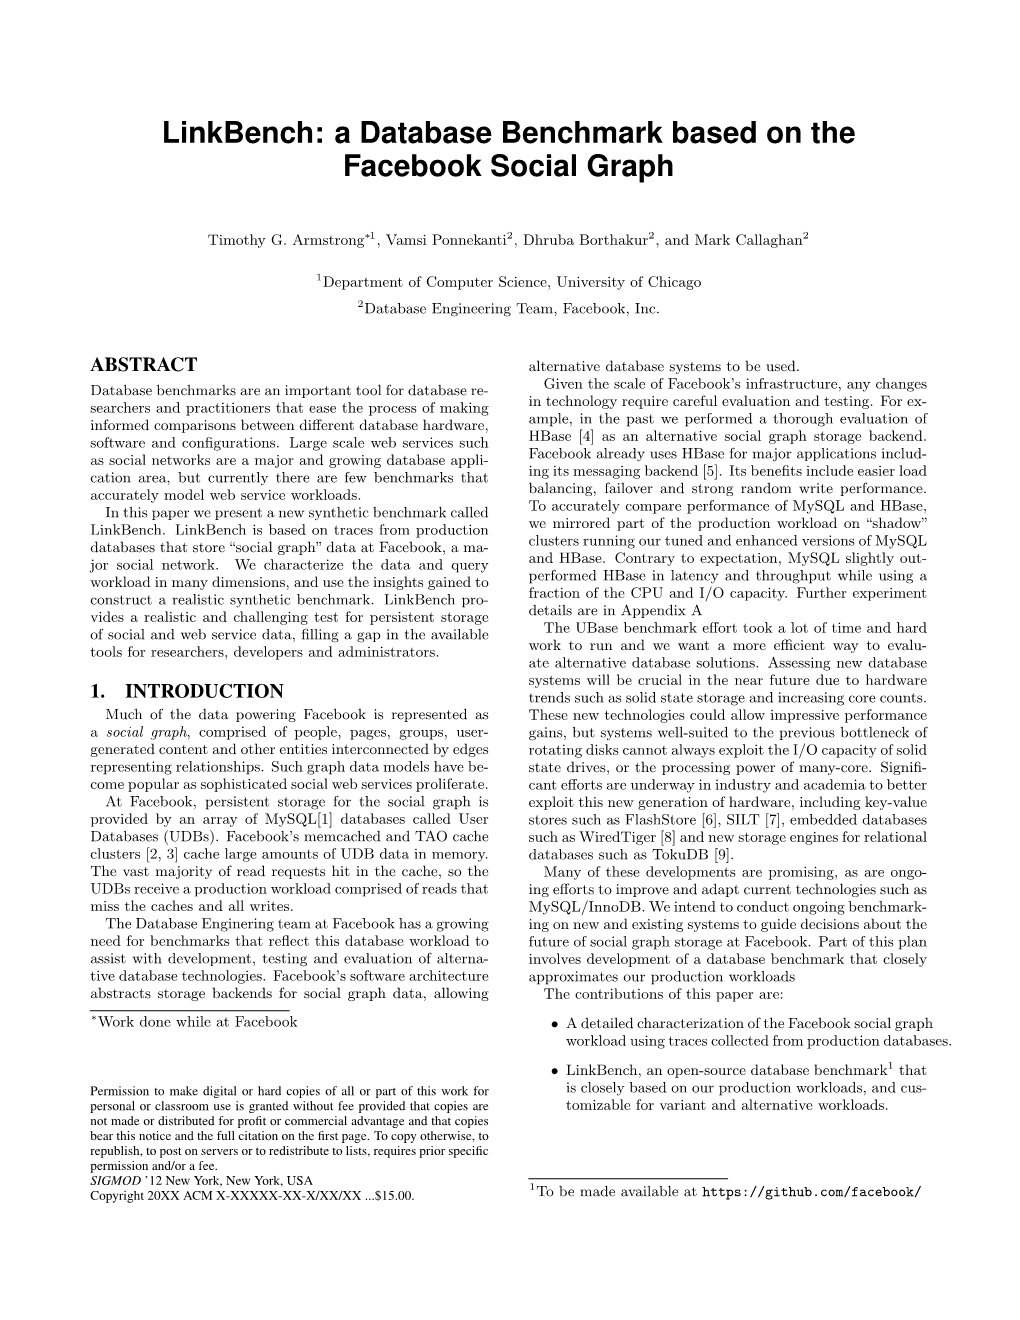 Linkbench: a Database Benchmark Based on the Facebook Social Graph